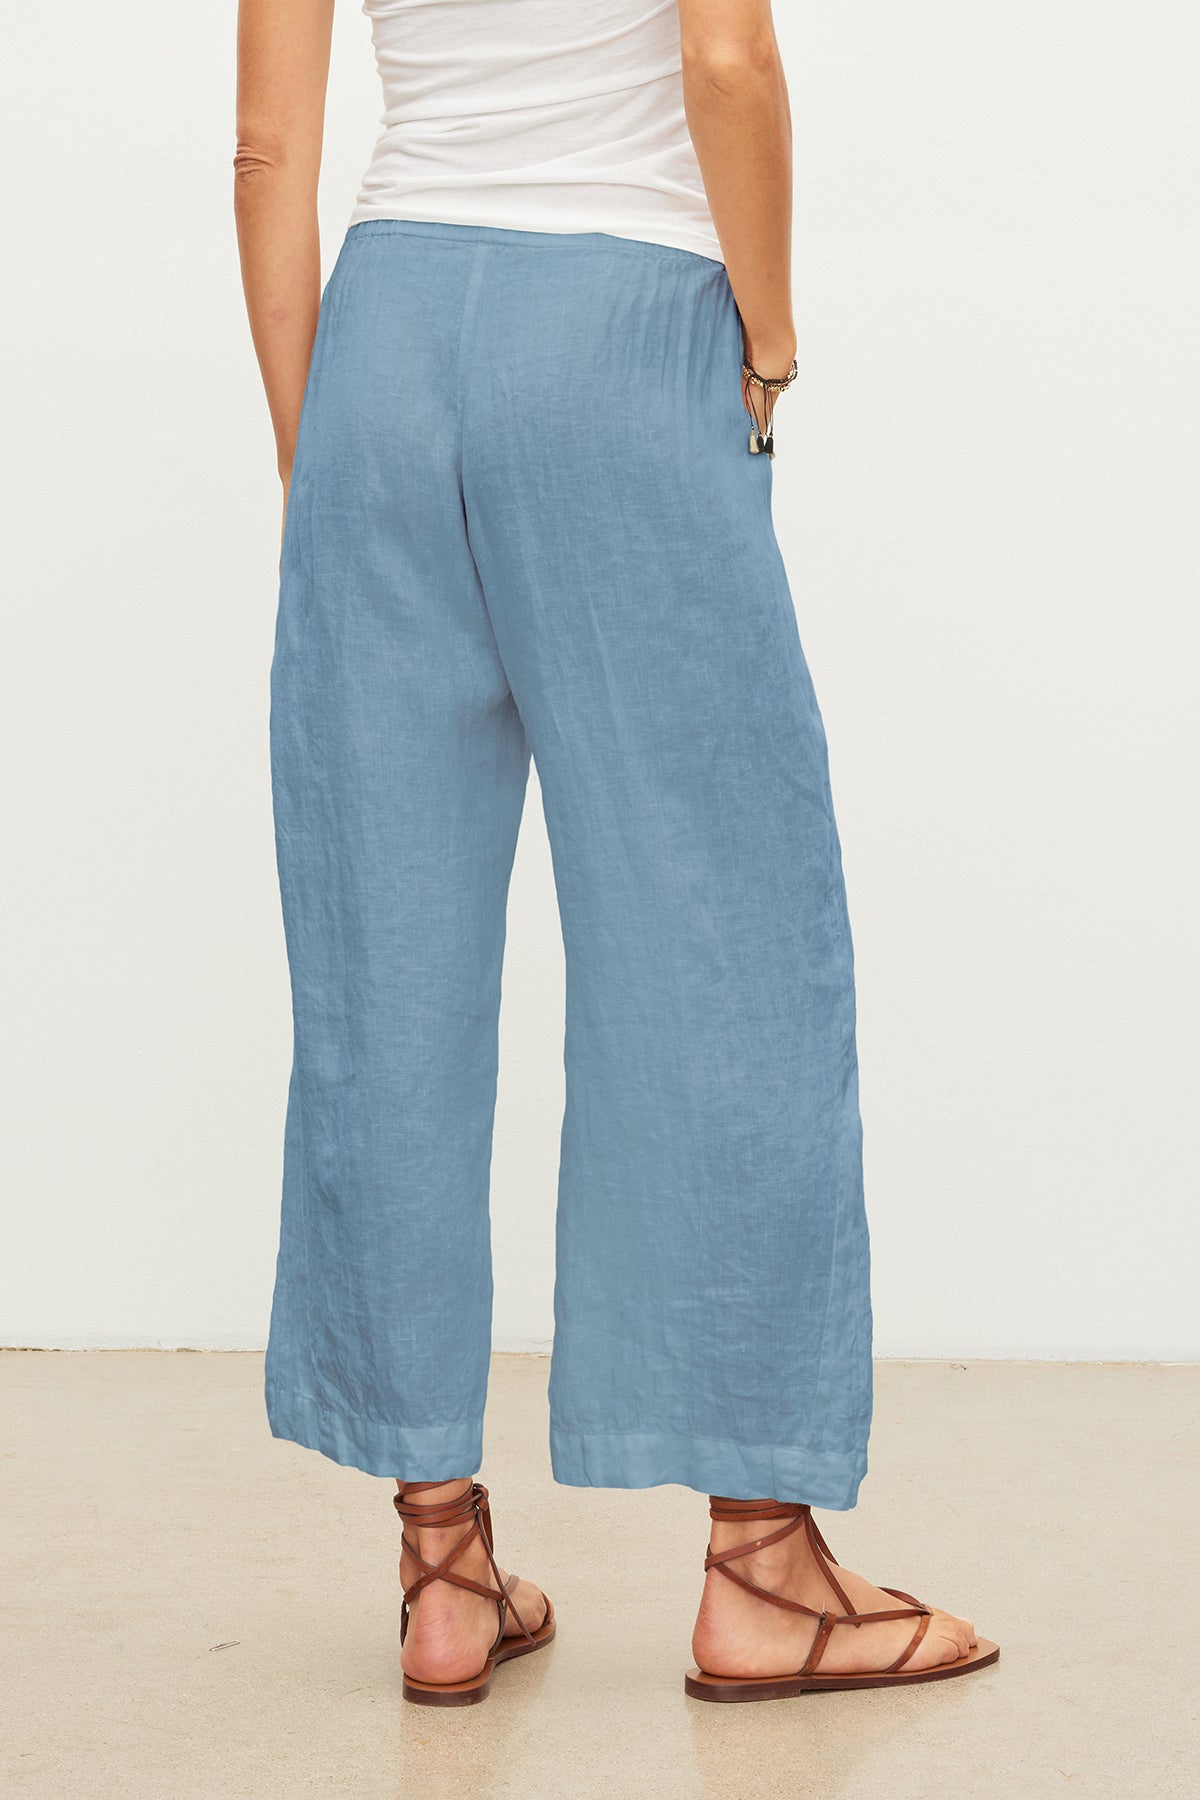 A person standing, wearing light blue wide-leg lightweight LOLA LINEN PANT by Velvet by Graham & Spencer, a white top, and brown sandals. The photo is taken from behind, showing the full length of the relaxed leg crops and sandals.-36161404960961